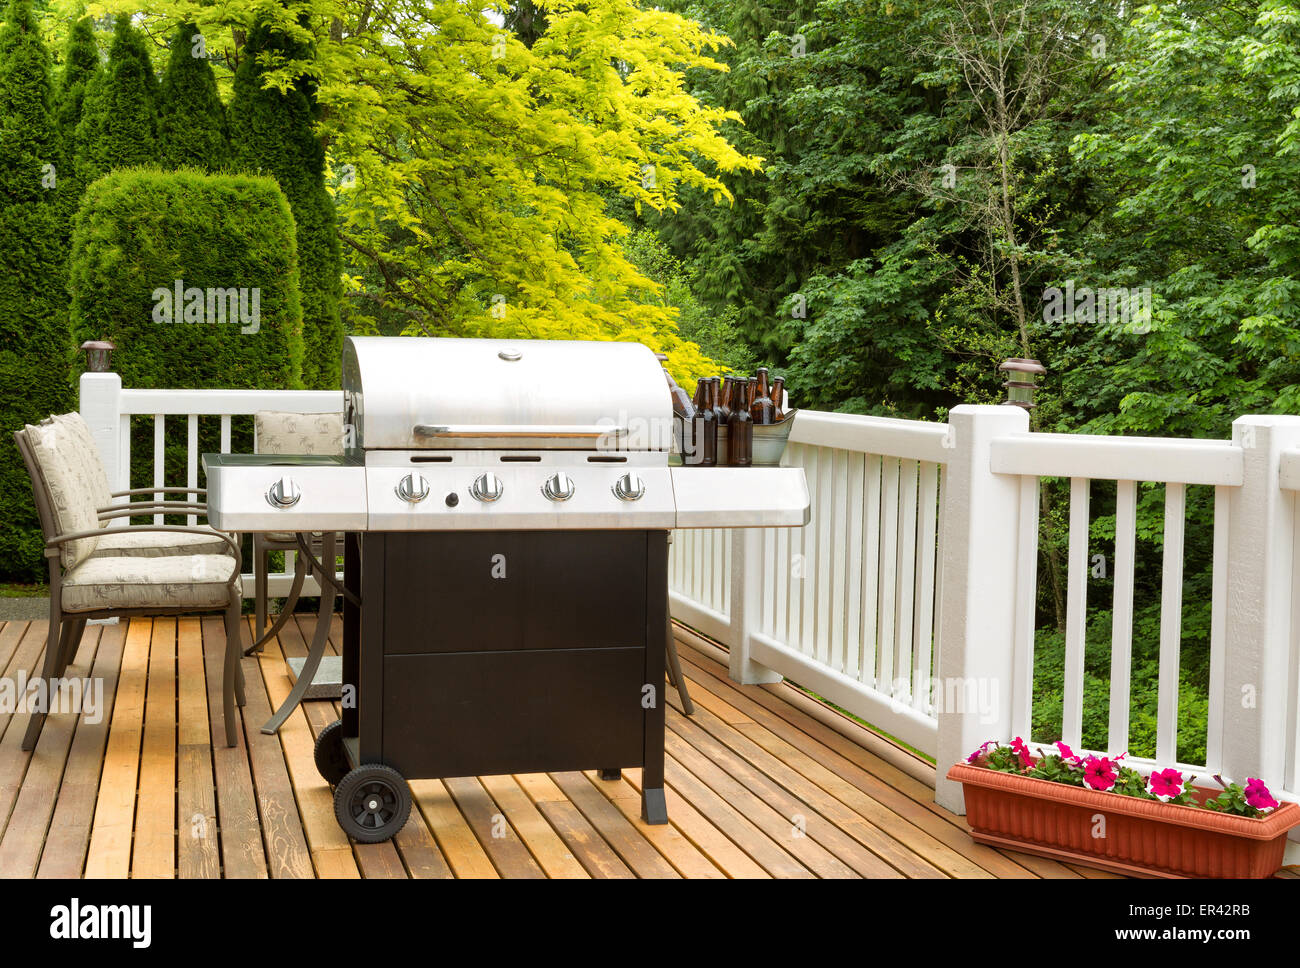 Photo of clean barbecue cooker with cold beer in bucket on cedar deck. Table and colorful trees in background. Stock Photo